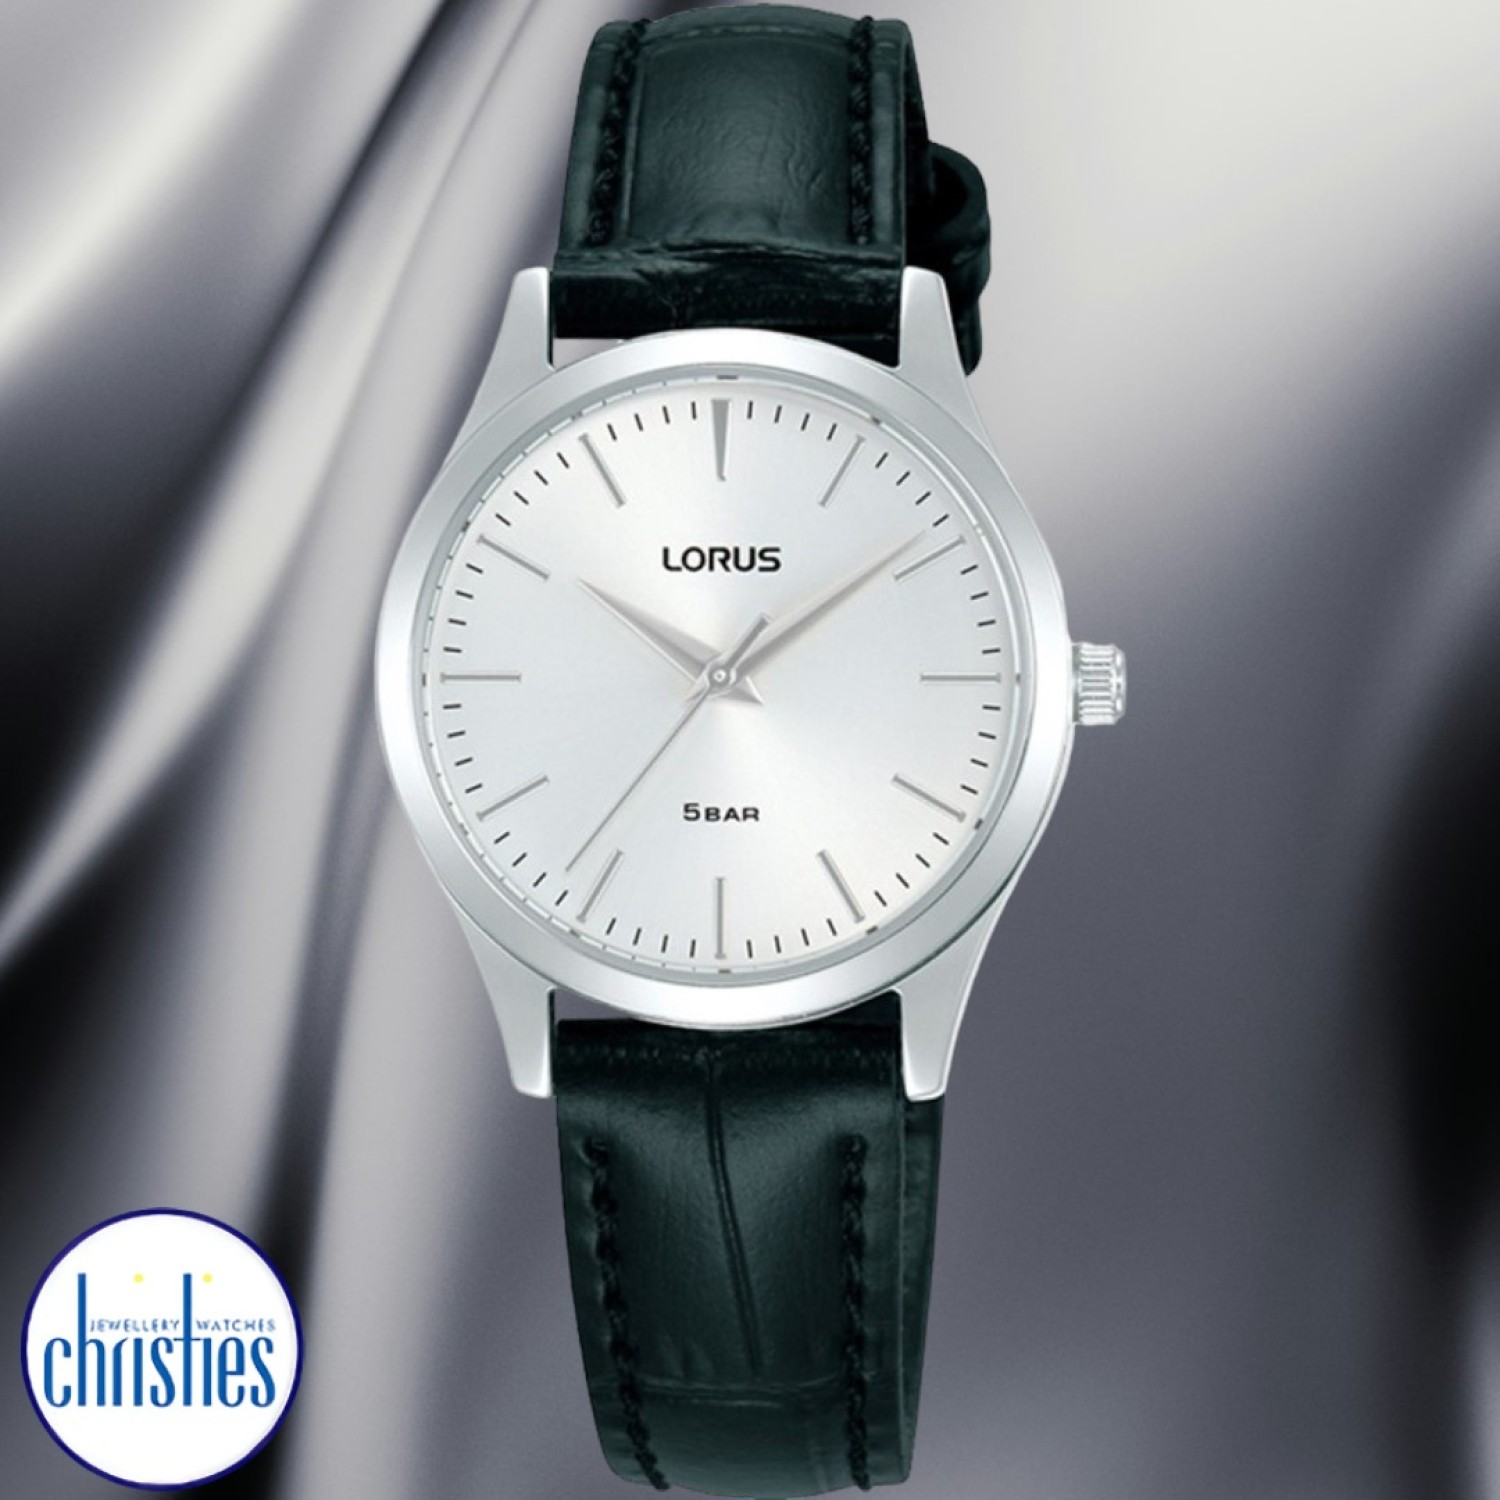 RRX83HX-9 Lorus Black Leather Strap Watch RRX83HX-9 Lorus by Seiko Auckland s offers a diverse range of watch styles, including analog, digital, sports, and dress watches